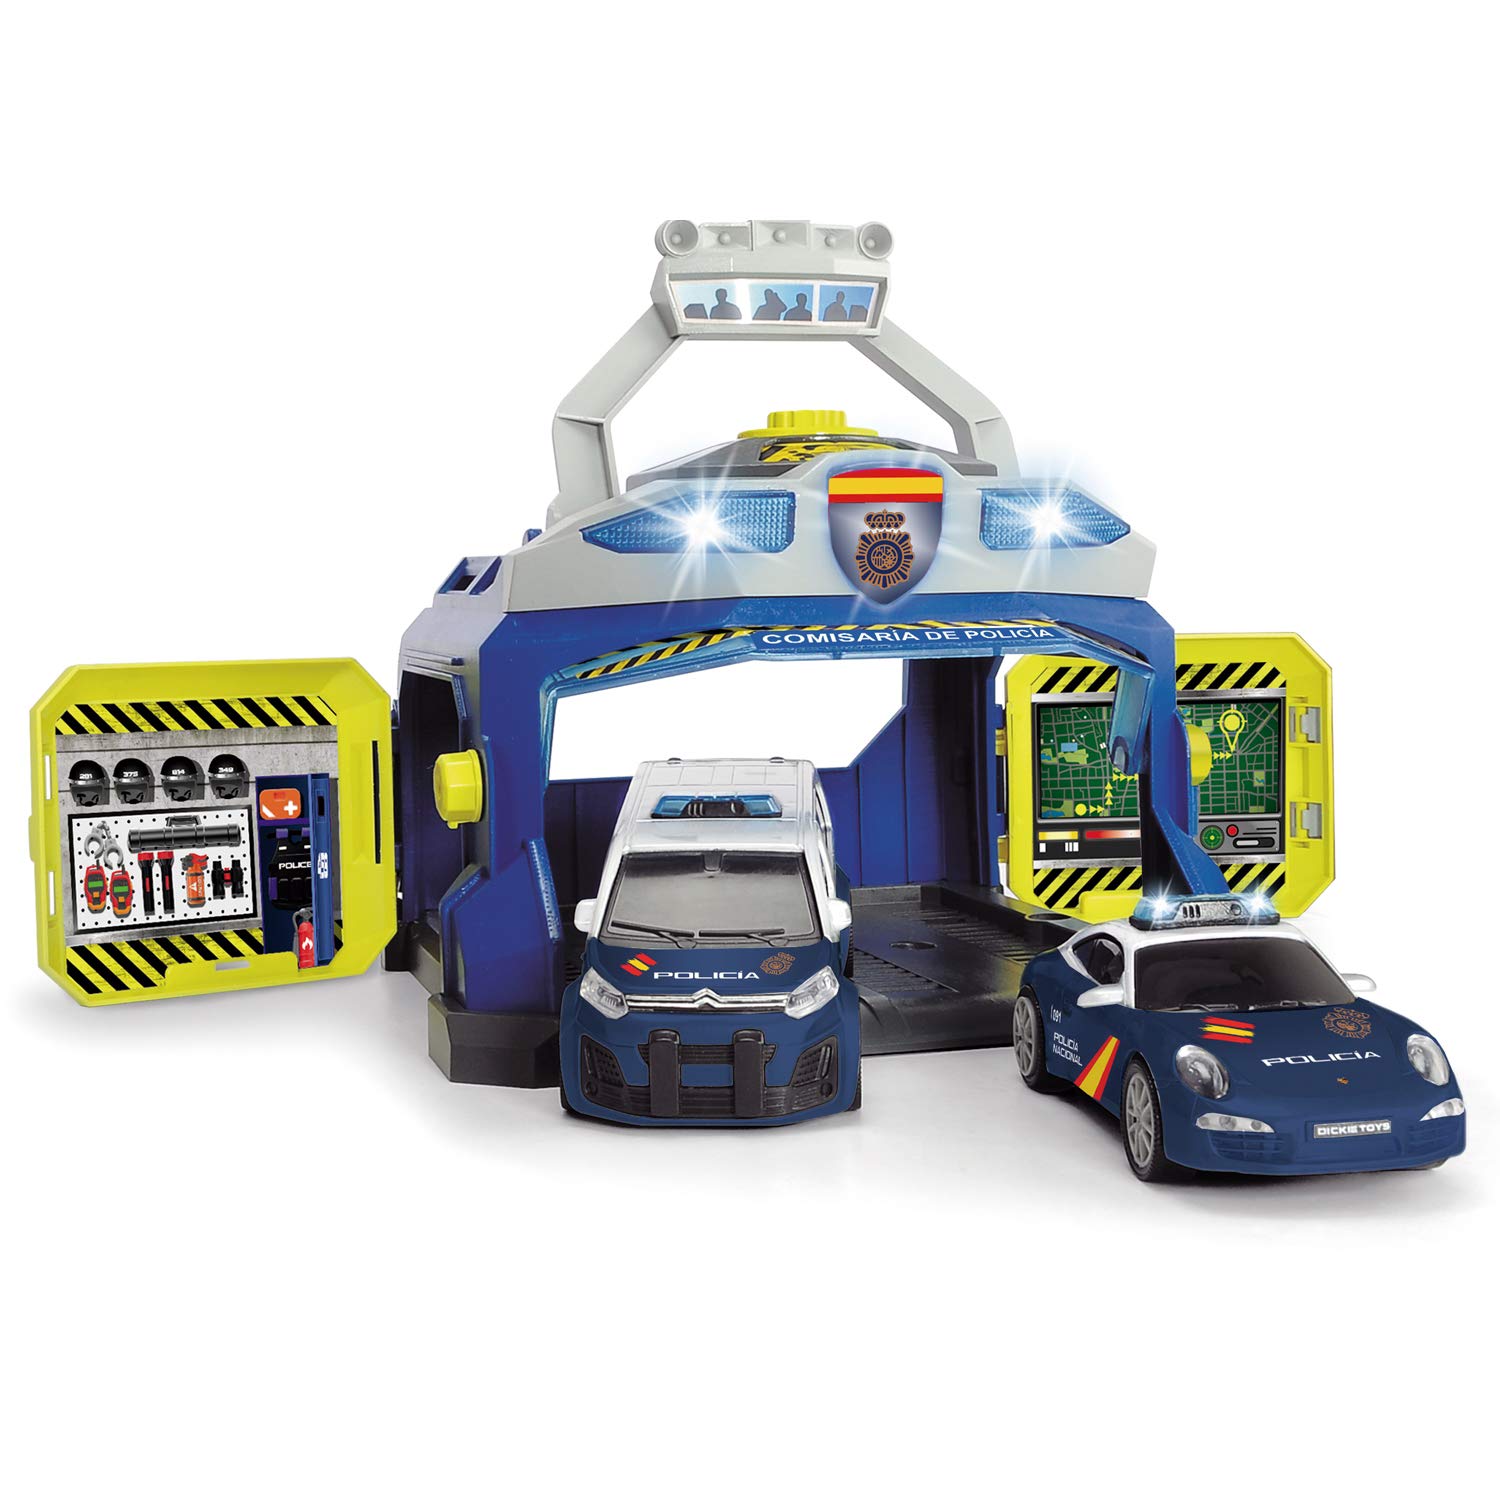 Dickie 1155020 Police National Playset Communion With Two Vehicles 17 Cm To